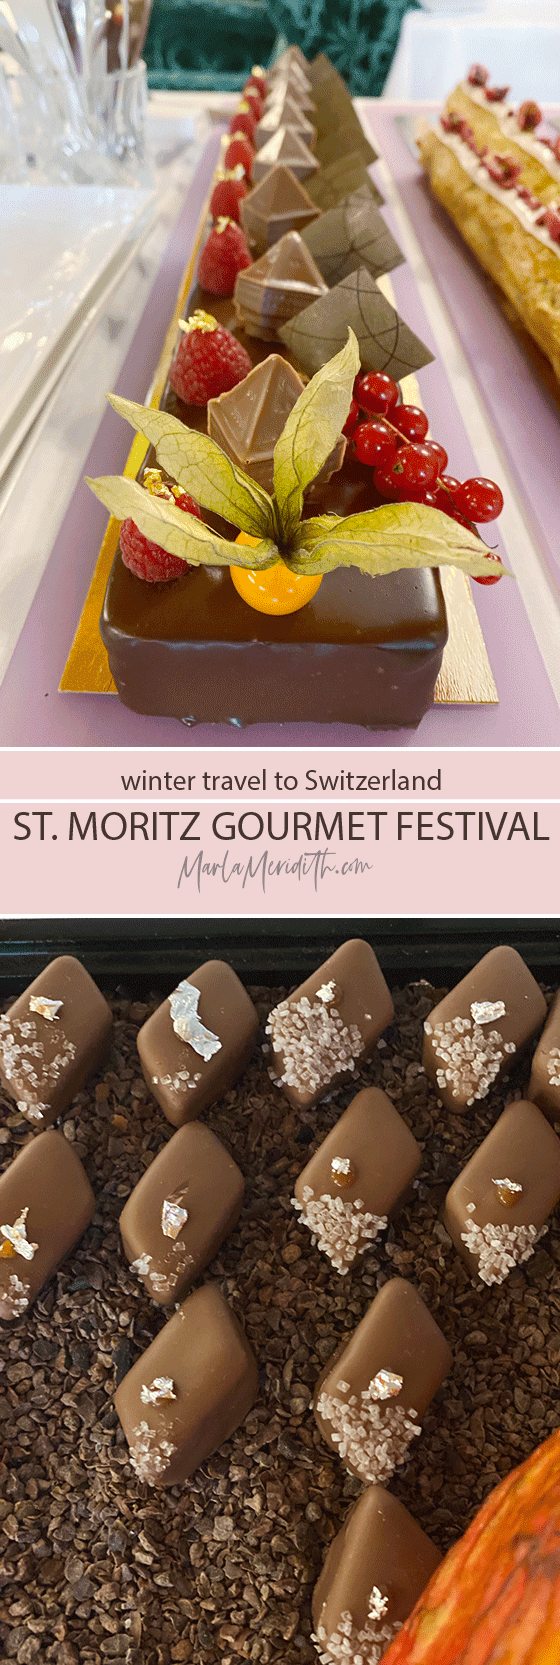 Add to your bucket list! The St. Moritz Gourmet Food Festival